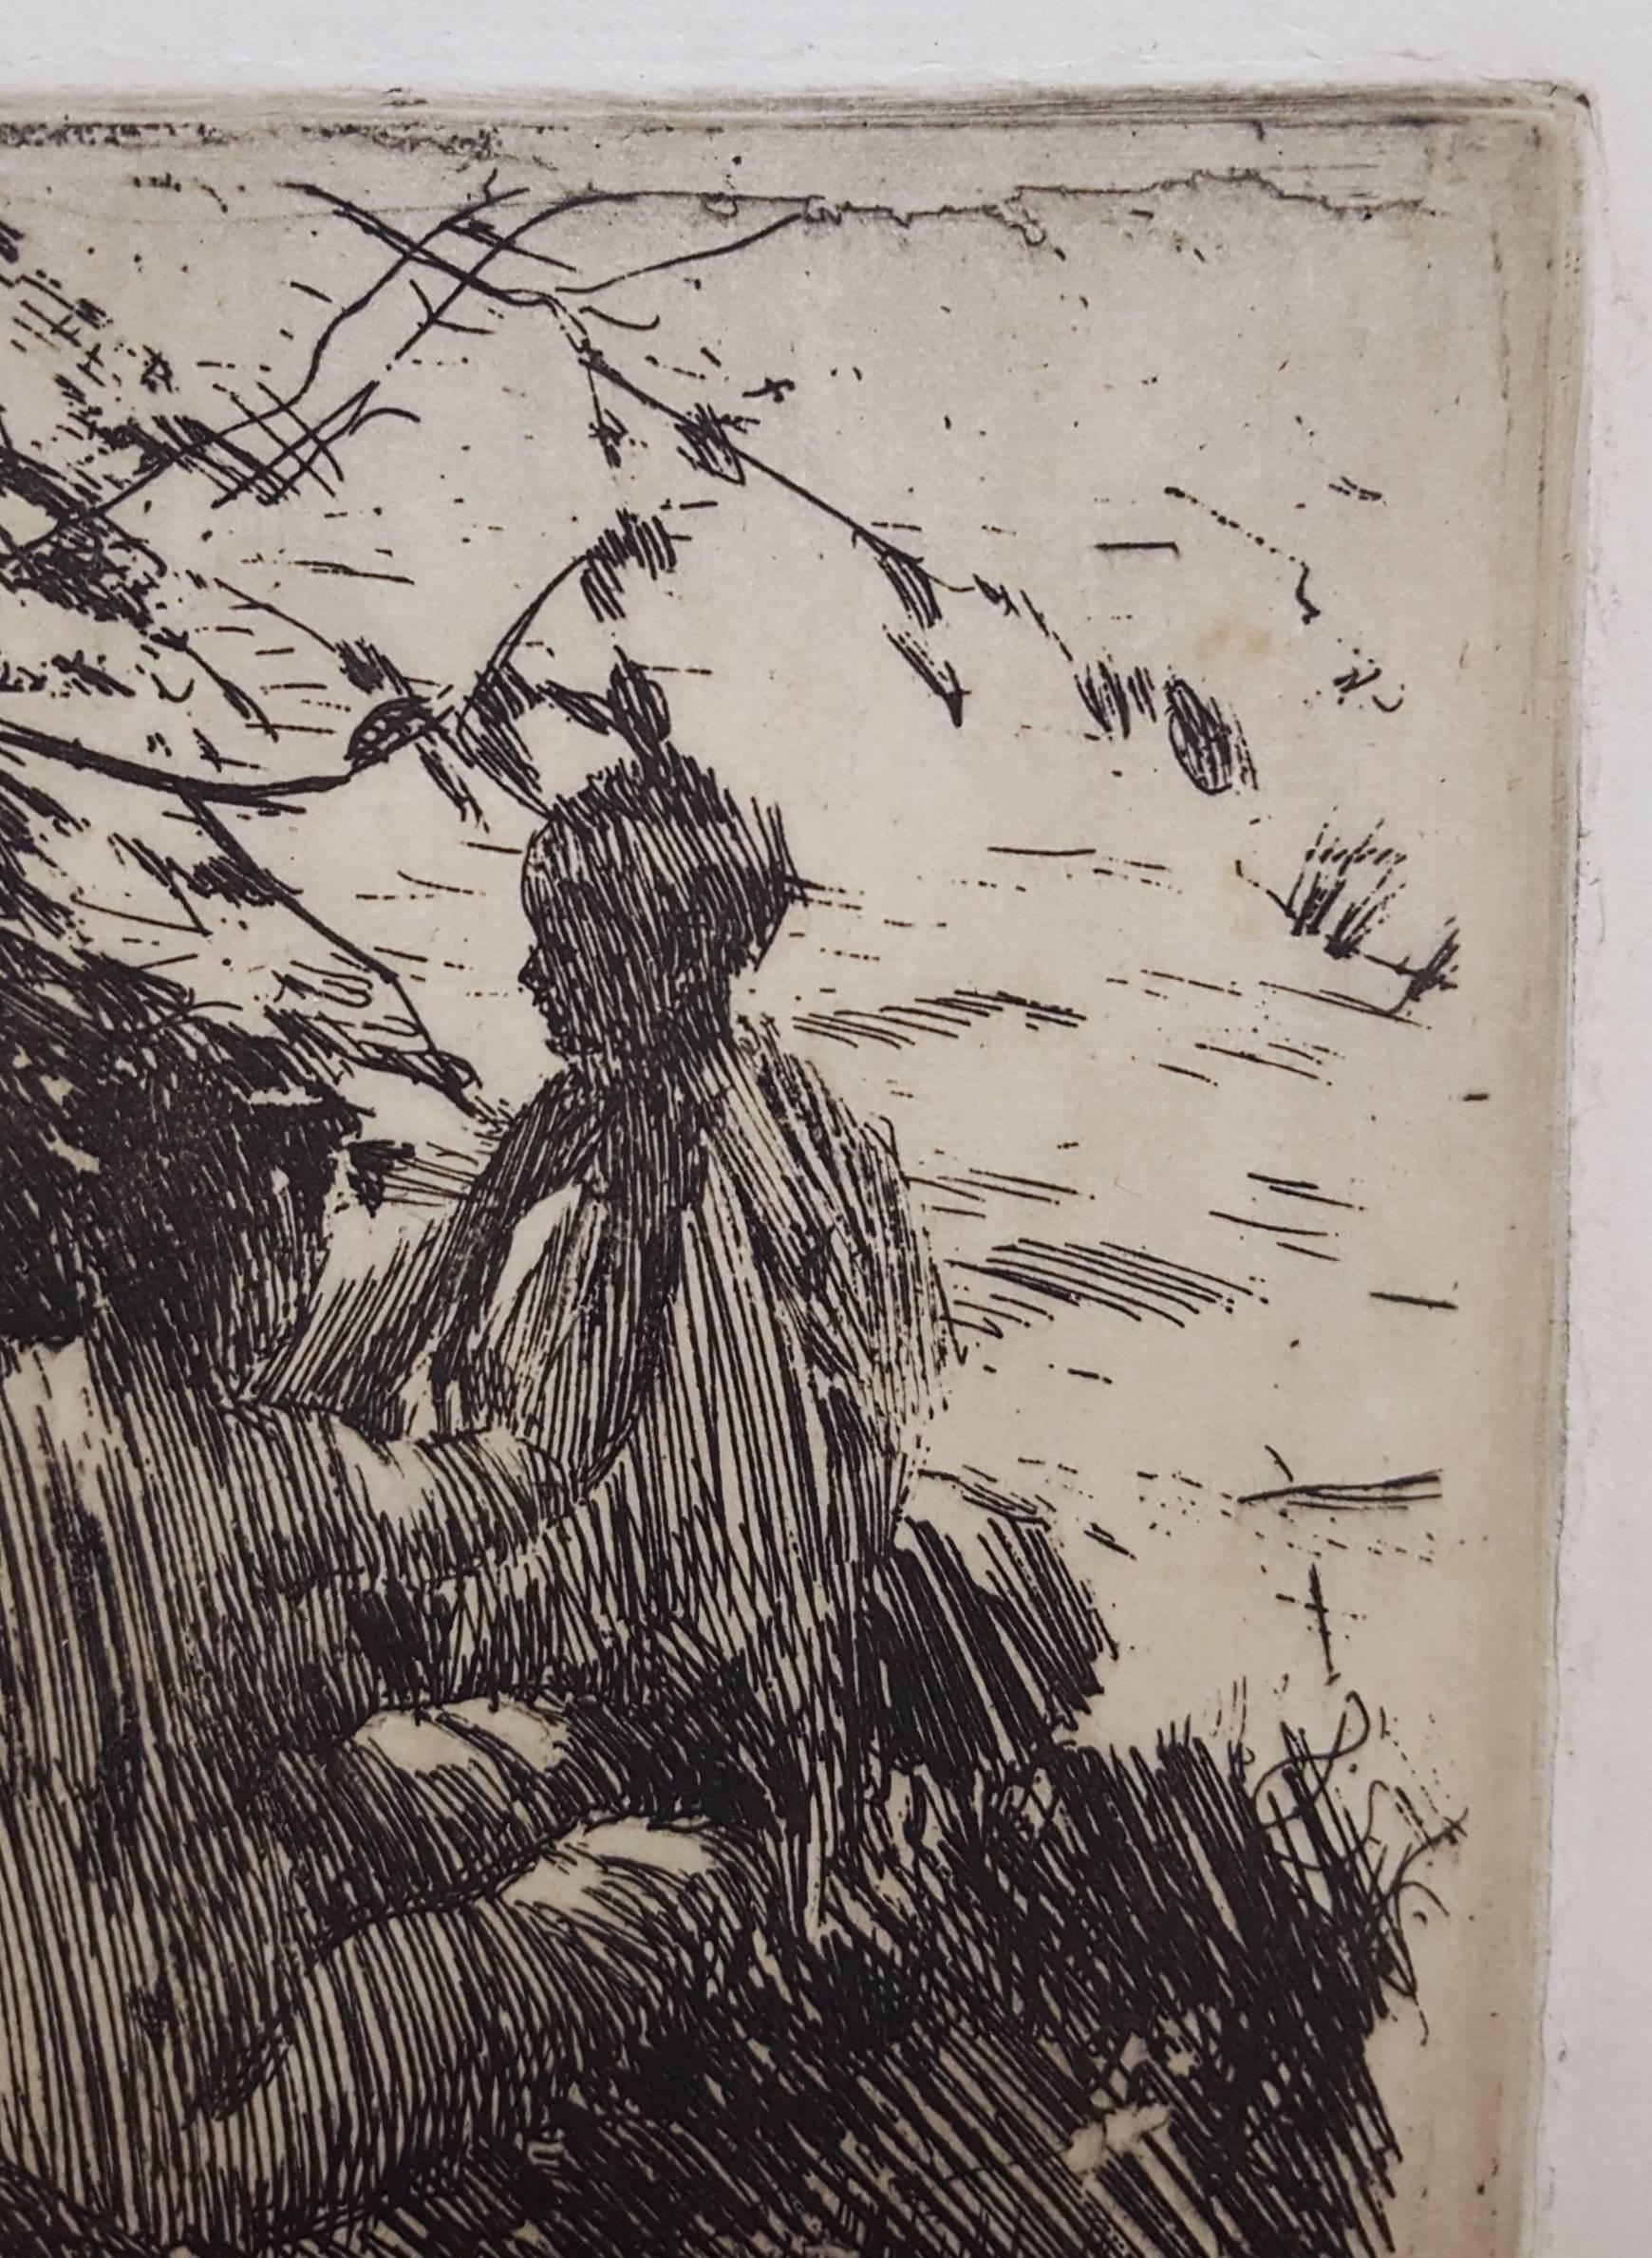 An original etching on laid paper by Swedish artist Anders Zorn (1860-1920) titled 